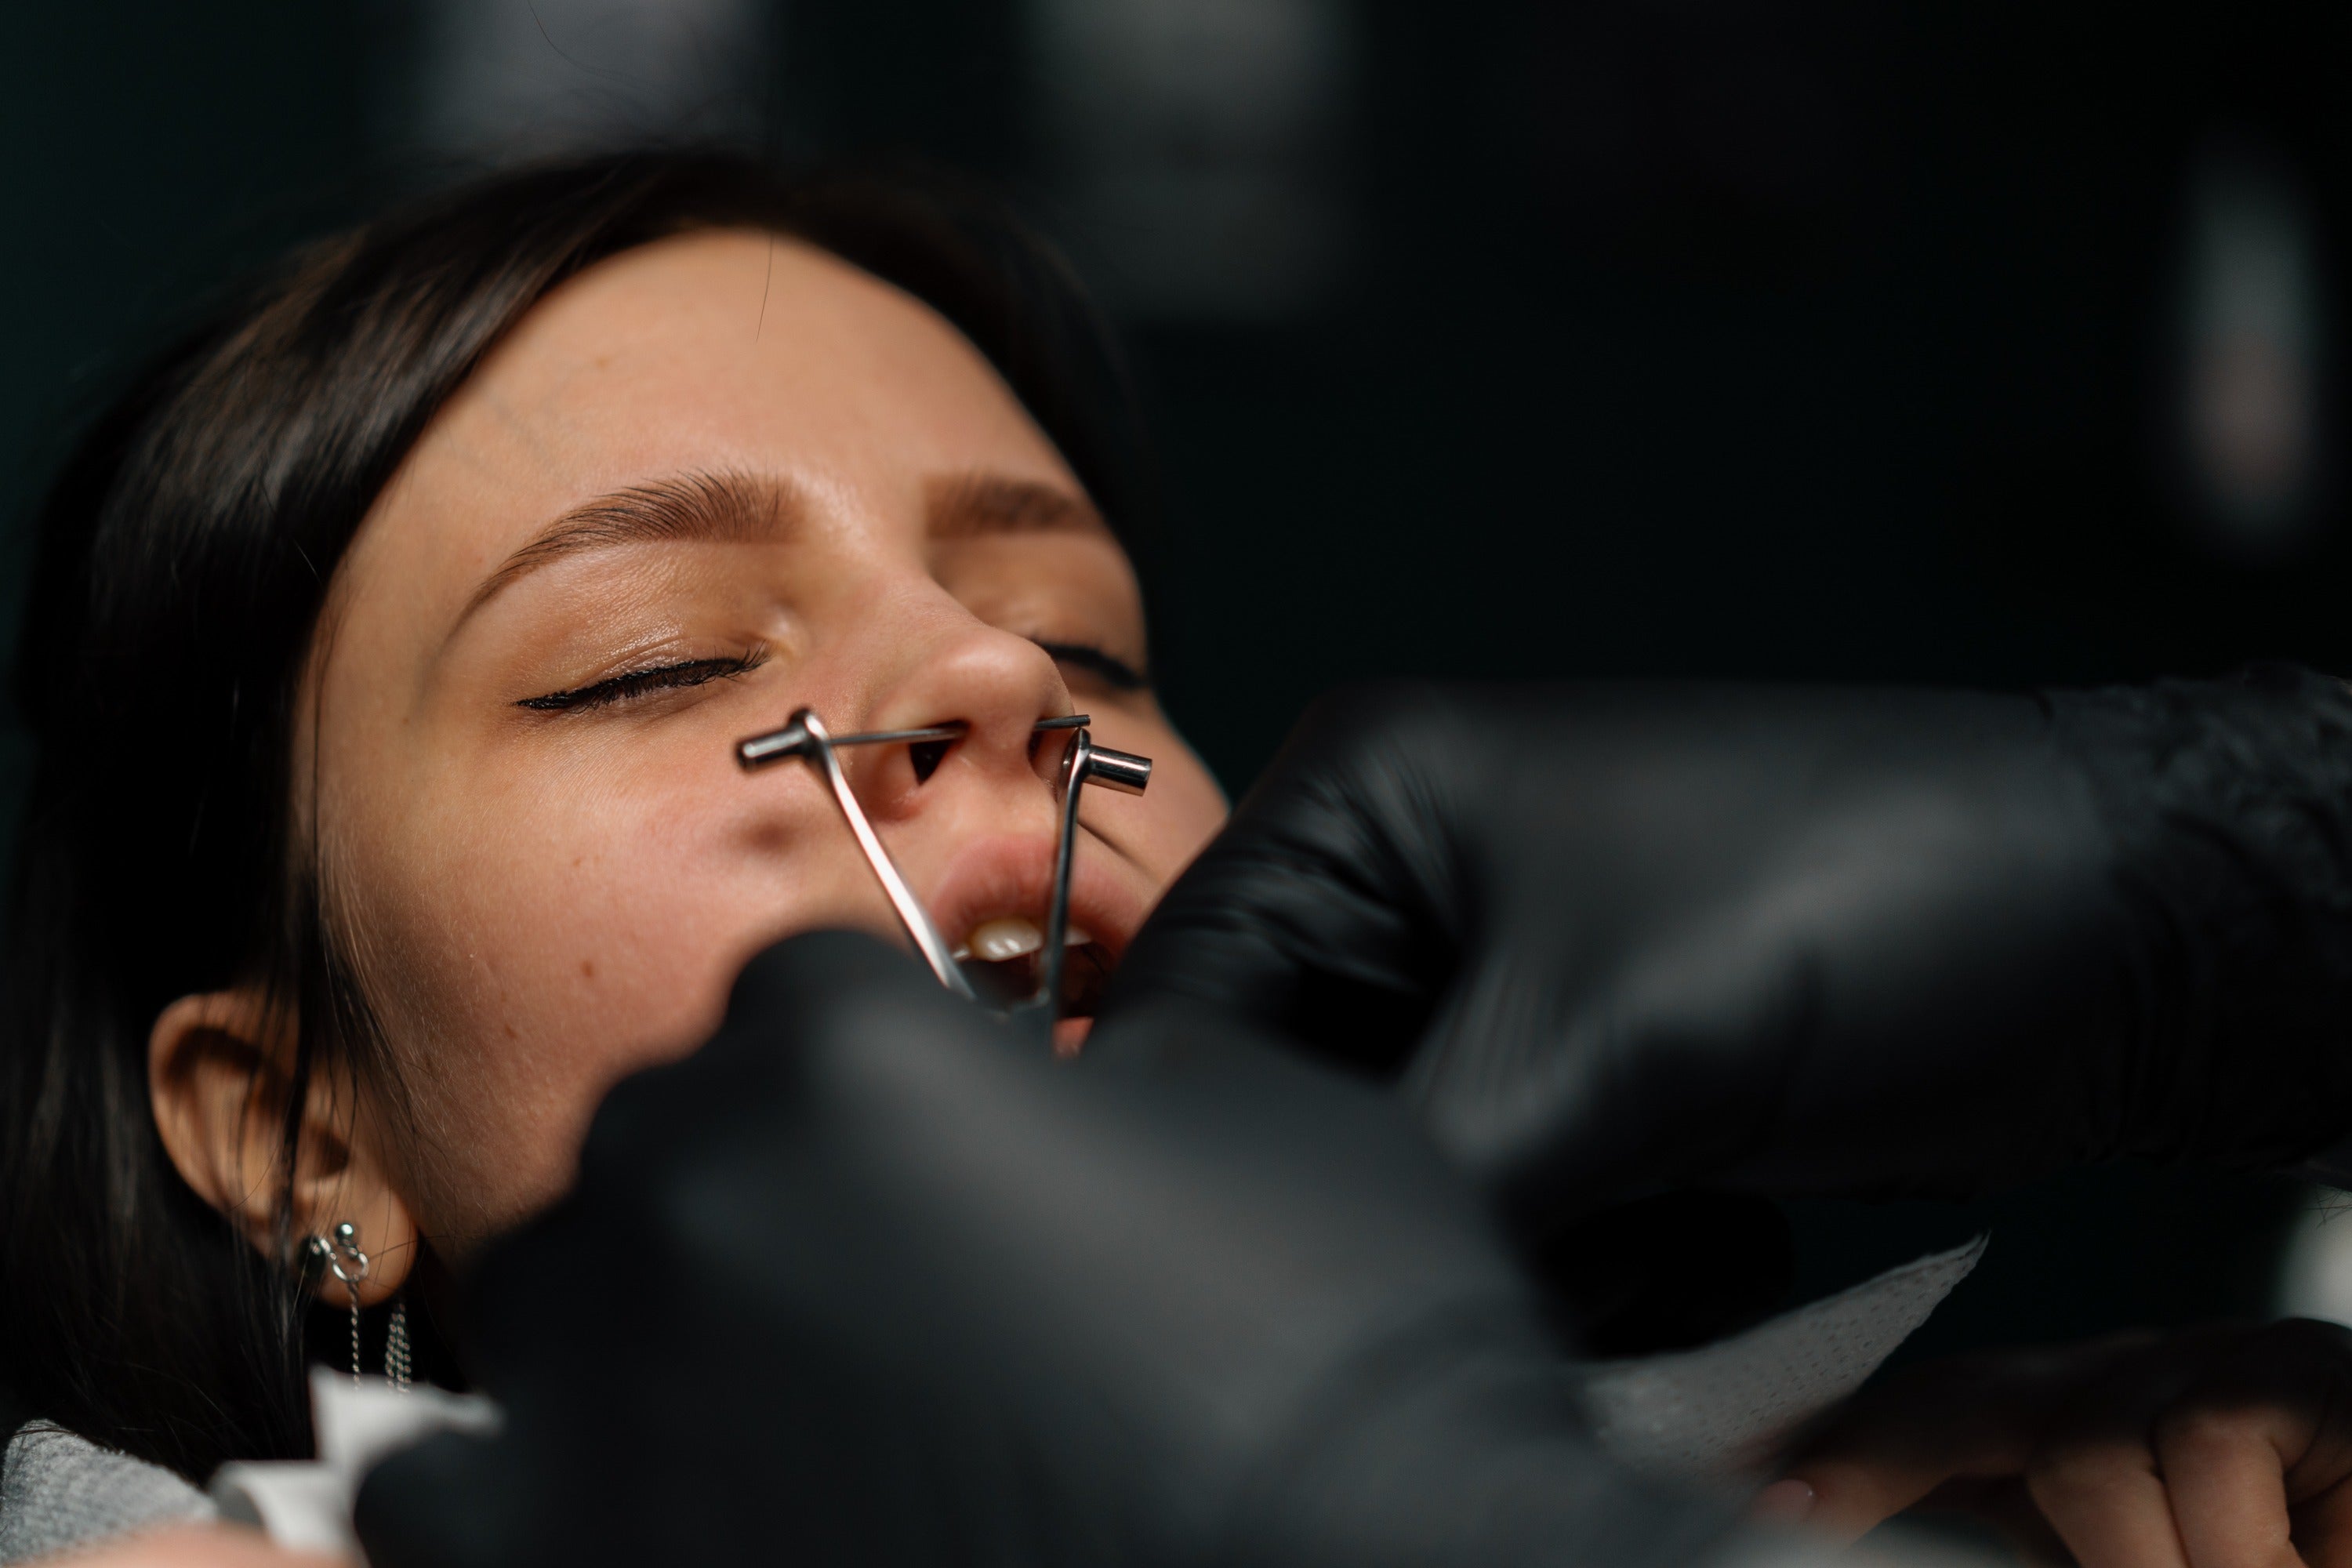 Types of nose piercing pain